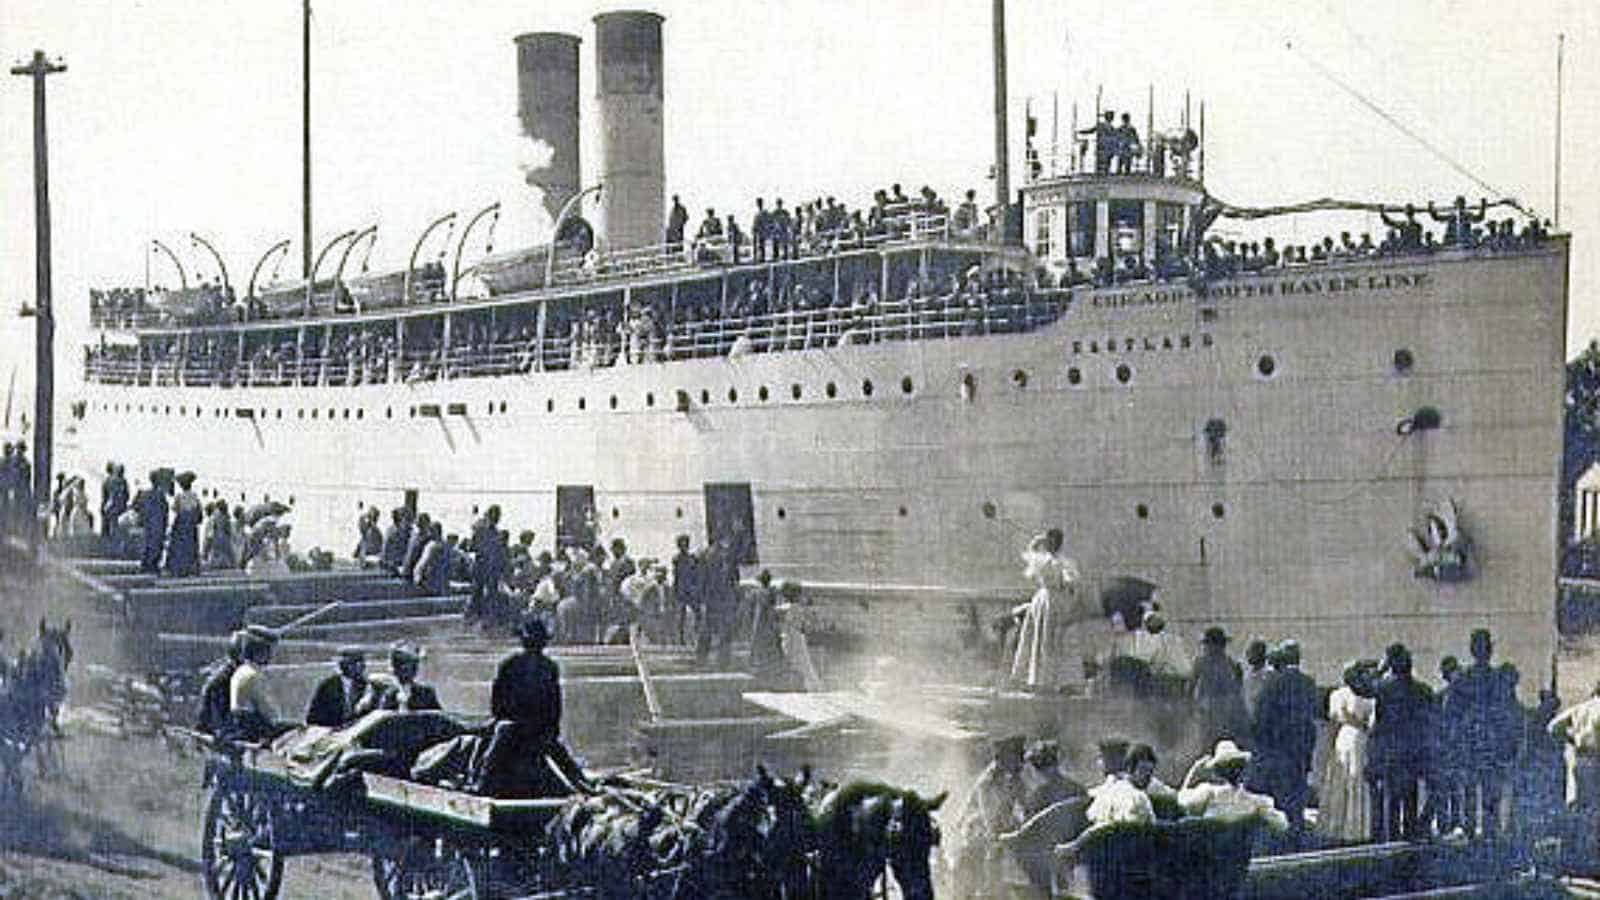 <p>In 1915, the steamship SS Eastland overturned while docked in Chicago, resulting in the deaths of over 800 passengers and crew members. The ship’s design flaws and overcrowding were major contributors to this tragedy.</p><p>The SS Eastland disaster was caused by a combination of issues, including poor design and overloading of the ship beyond its capacity. It also highlighted the need for stricter regulations on passenger vessels and proper safety procedures.</p>